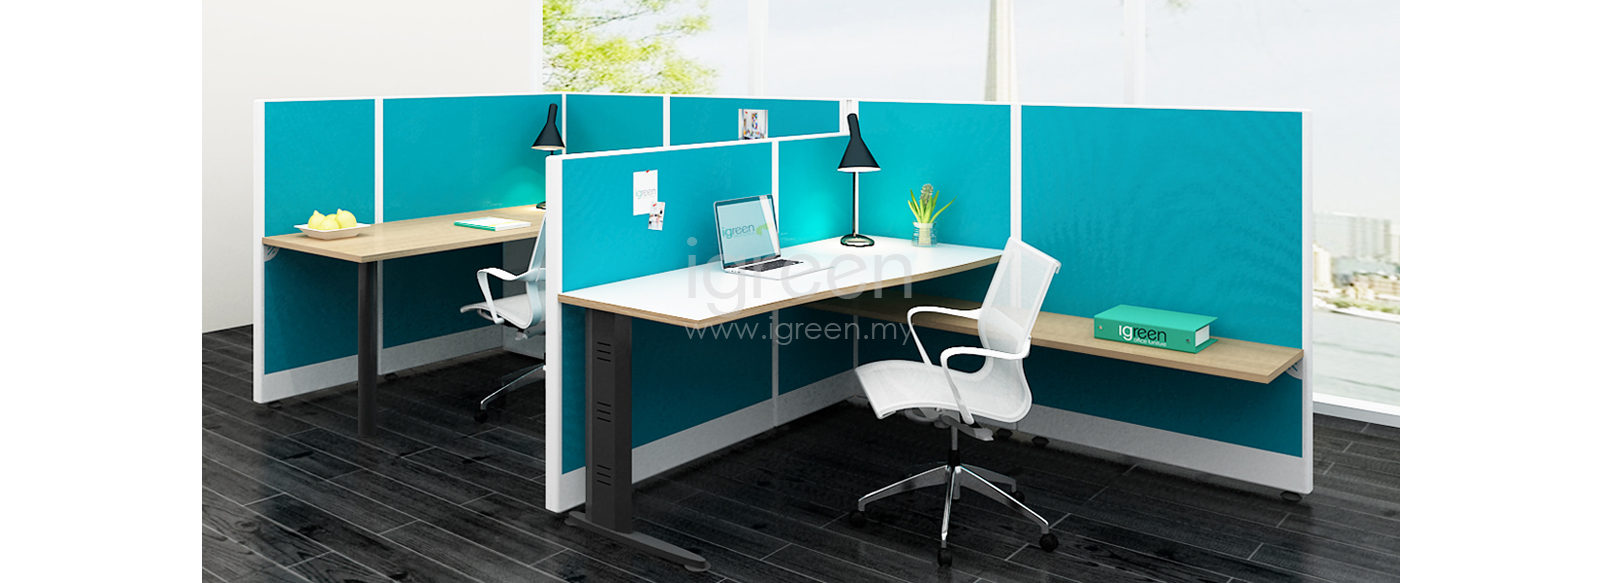 been series_private workstation_1600x583